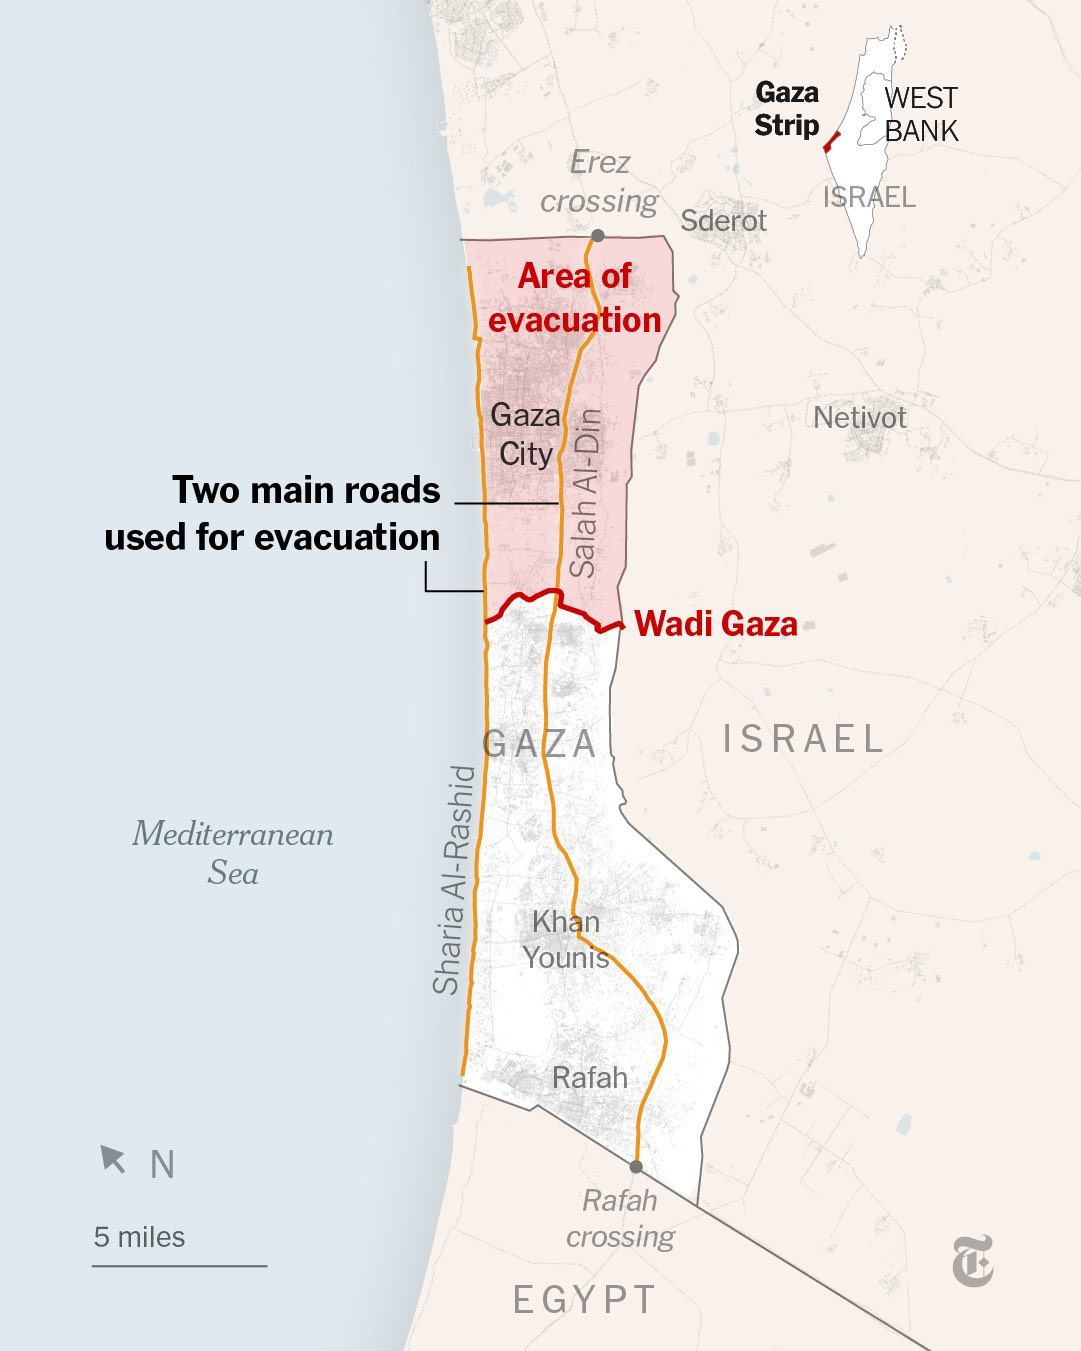 A map of the Gaza Strip showing the northern portion of the territory shaded to indicate the area that Israel said should be evacuated. The map also shows two main roads used for evacuations.